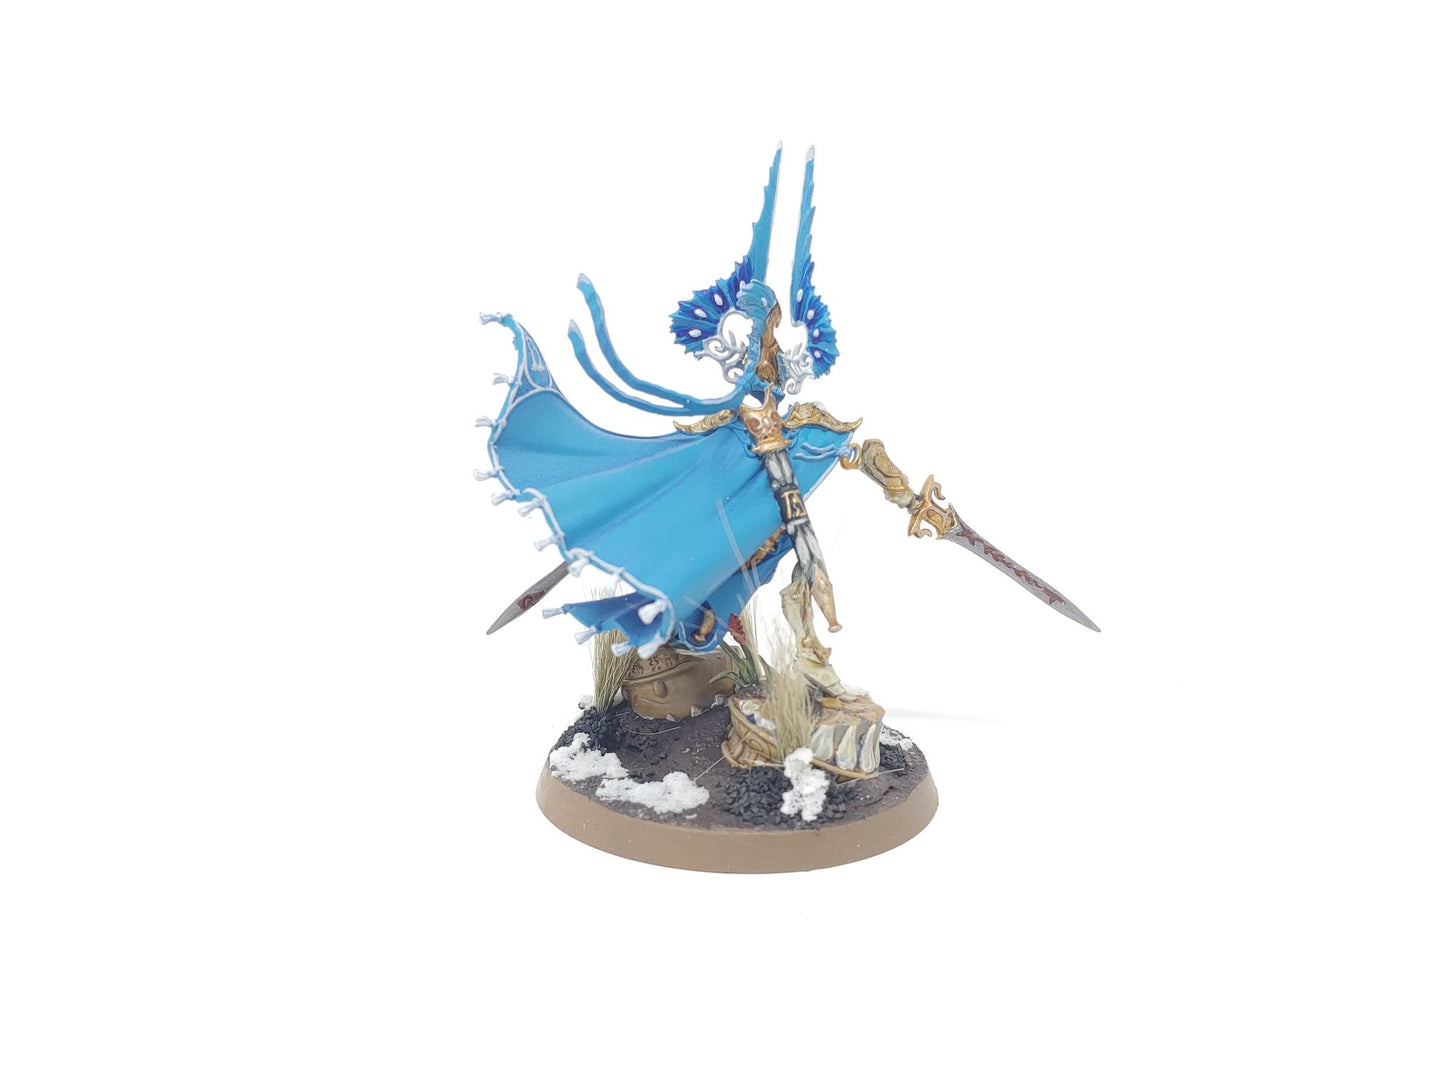 Warhammer Age of Sigmar: The Light of Eltharion (Well Painted)